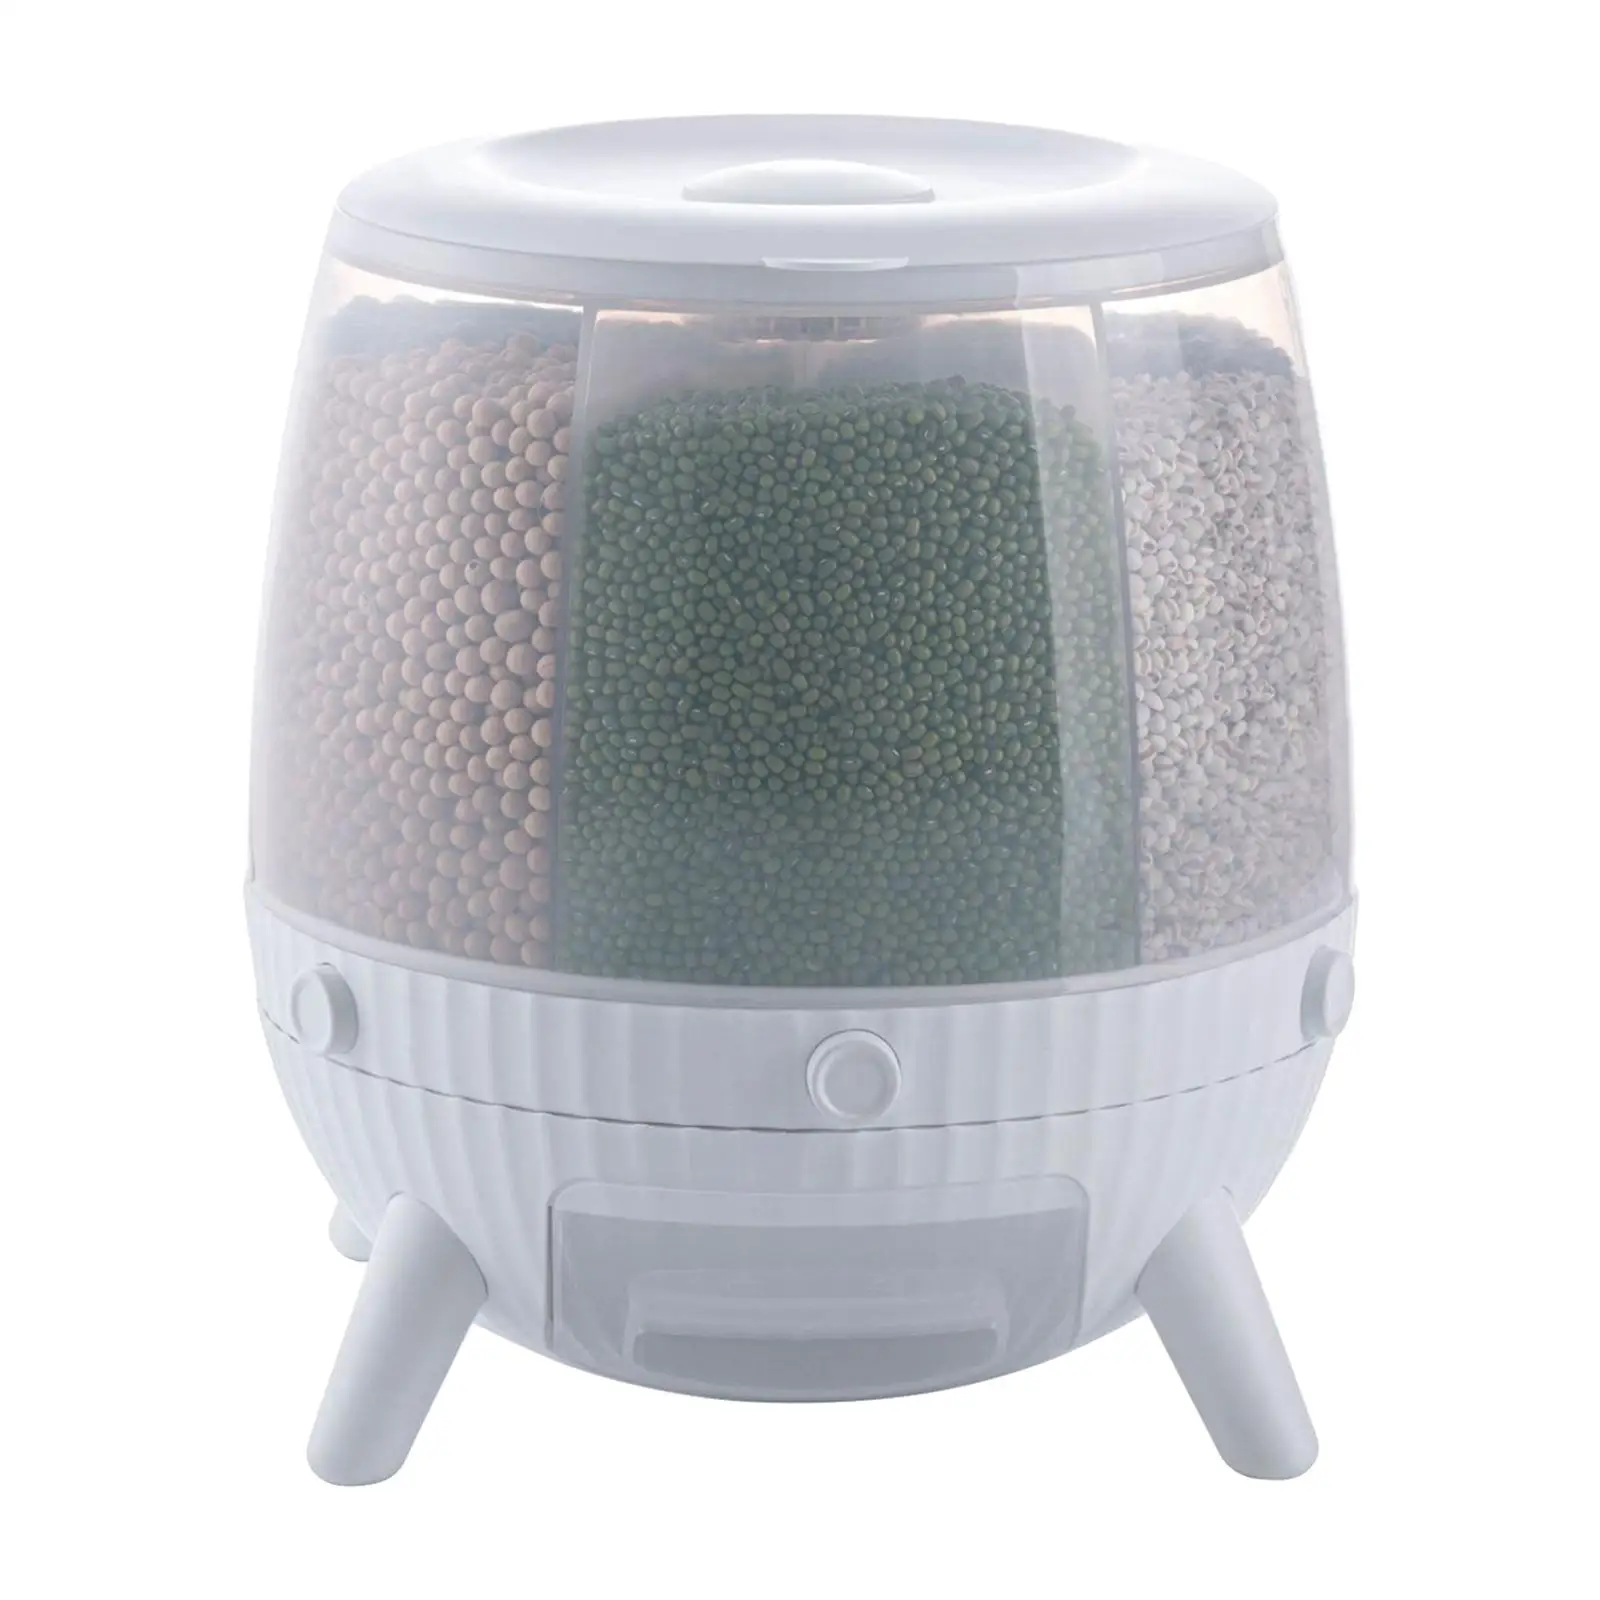 6 in 1 6KG Rotatable Rice Cereal Bucket Grain Dispenser Dry Food Storage Container for Kitchen